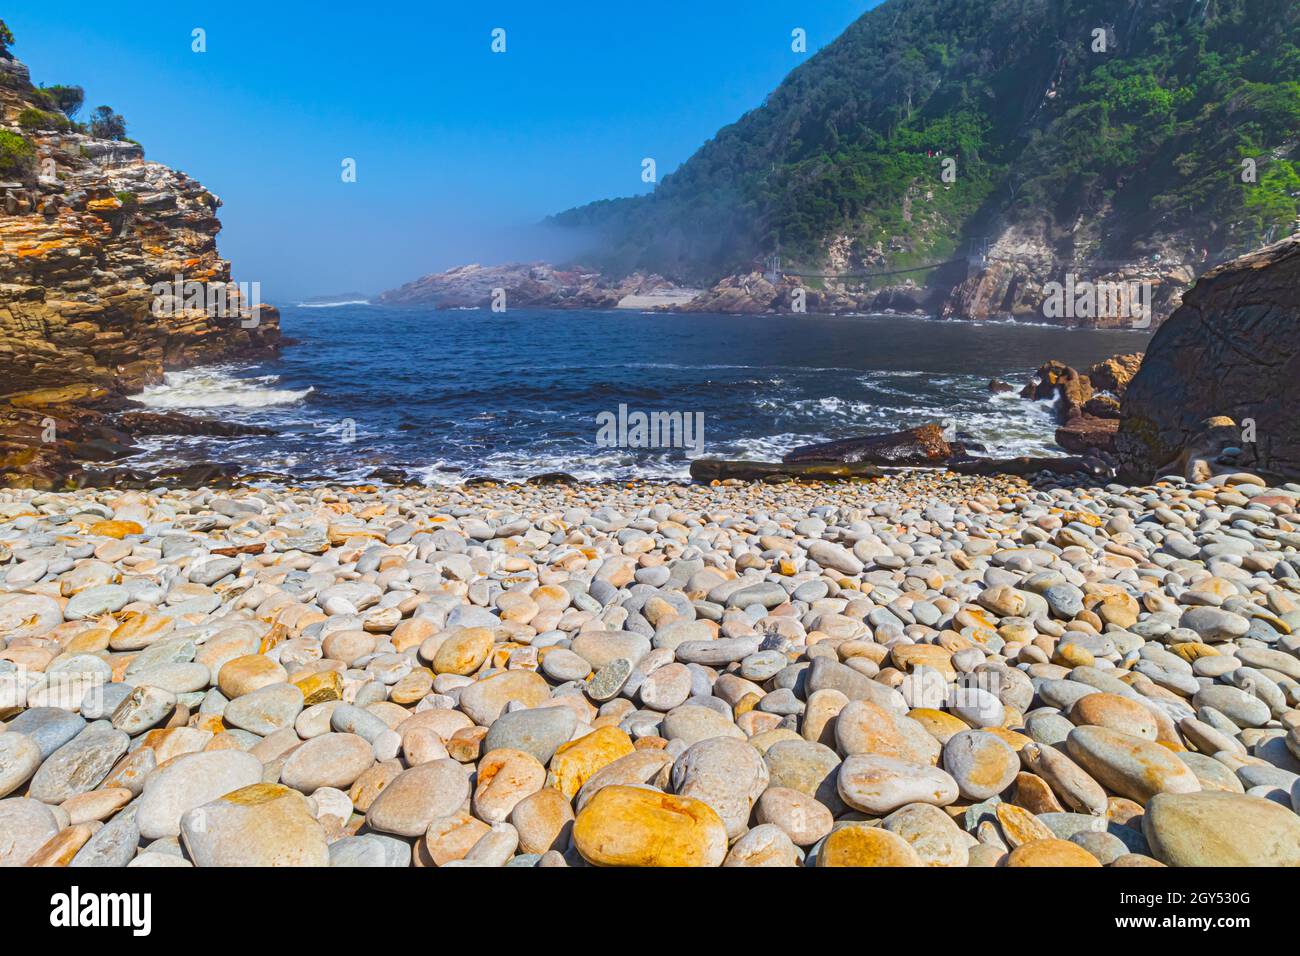 Rocky beach at Storms River Mouth in Tsitsikamma National Park of the Garden Route in Western Cape, South Africa. Stock Photo